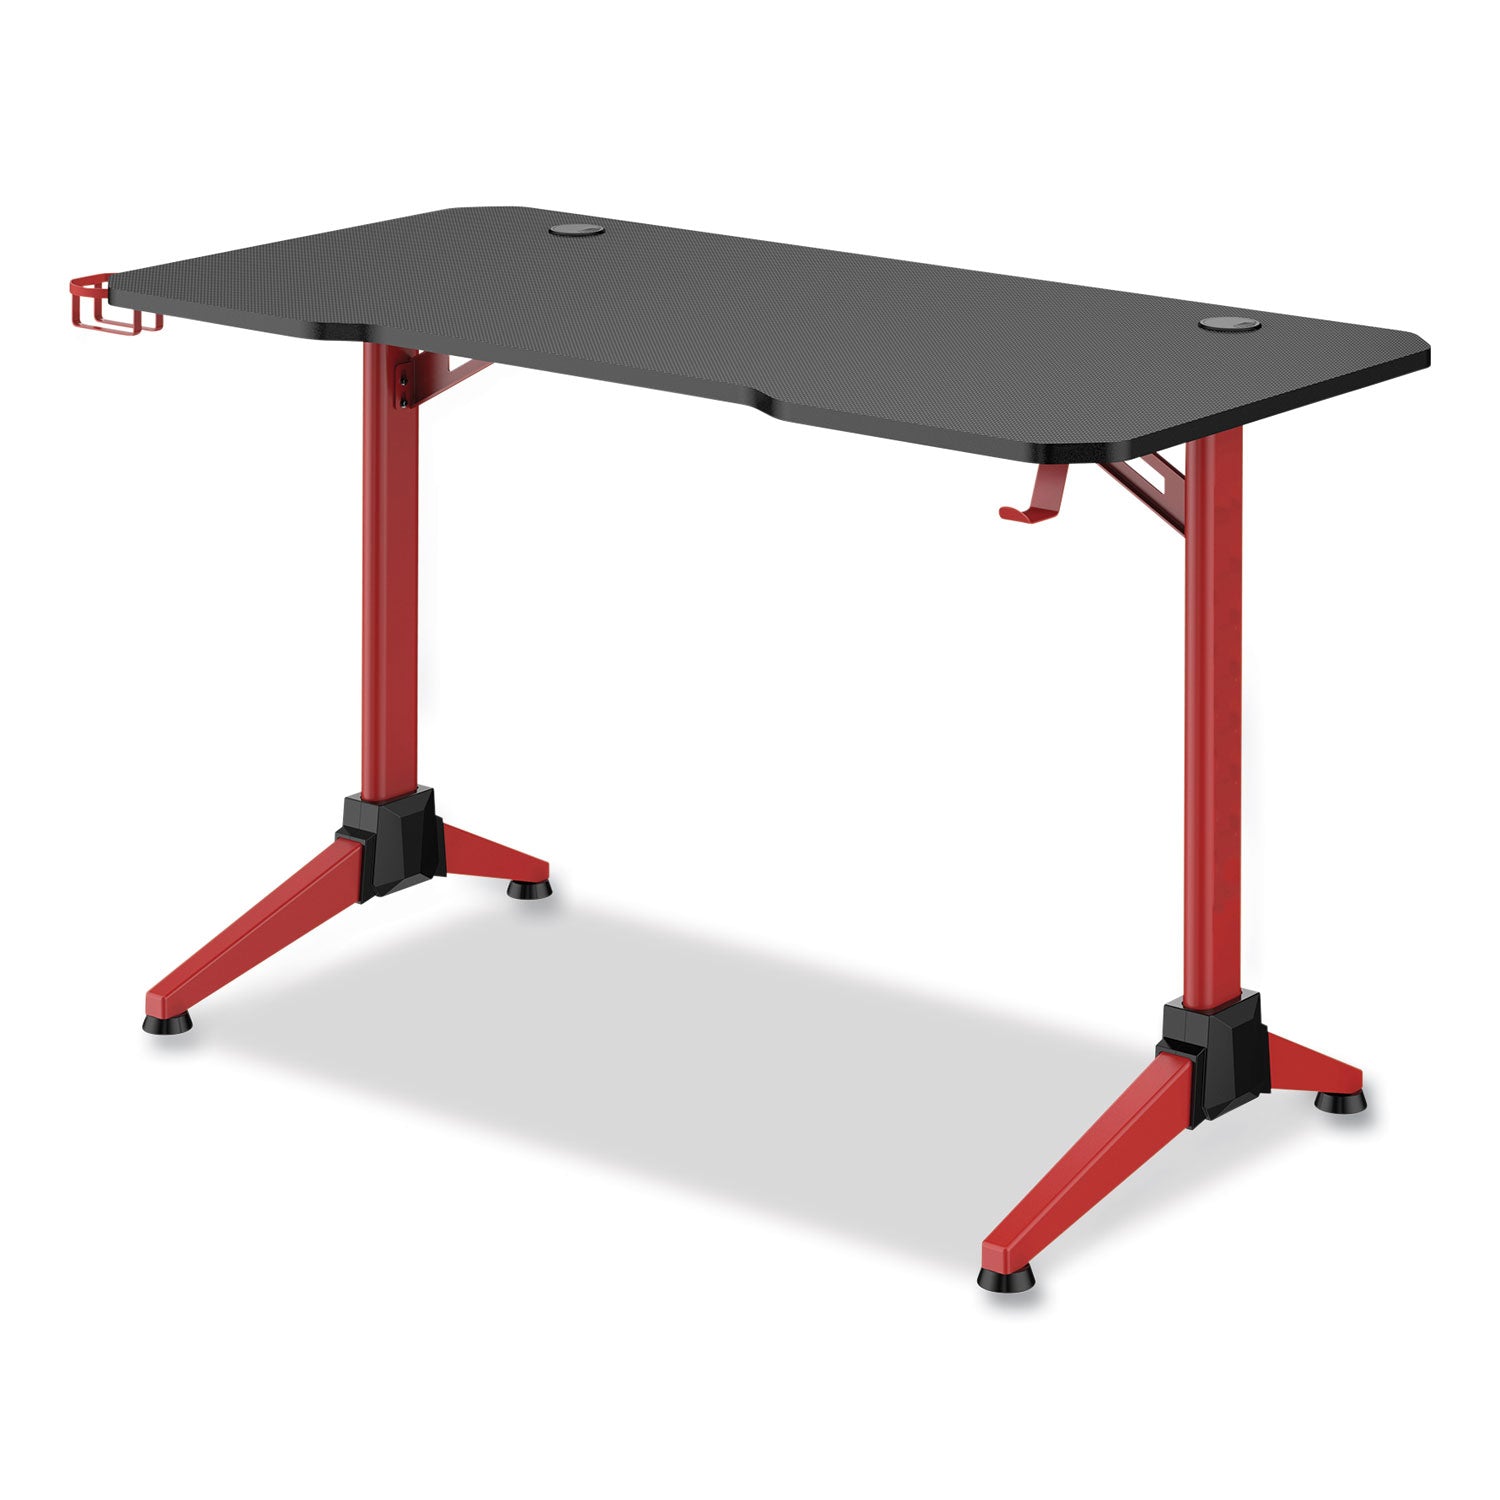 ultimate-computer-gaming-desk-472-x-236-x-295-black-red-ships-in-1-3-business-days_saf5393rd - 1